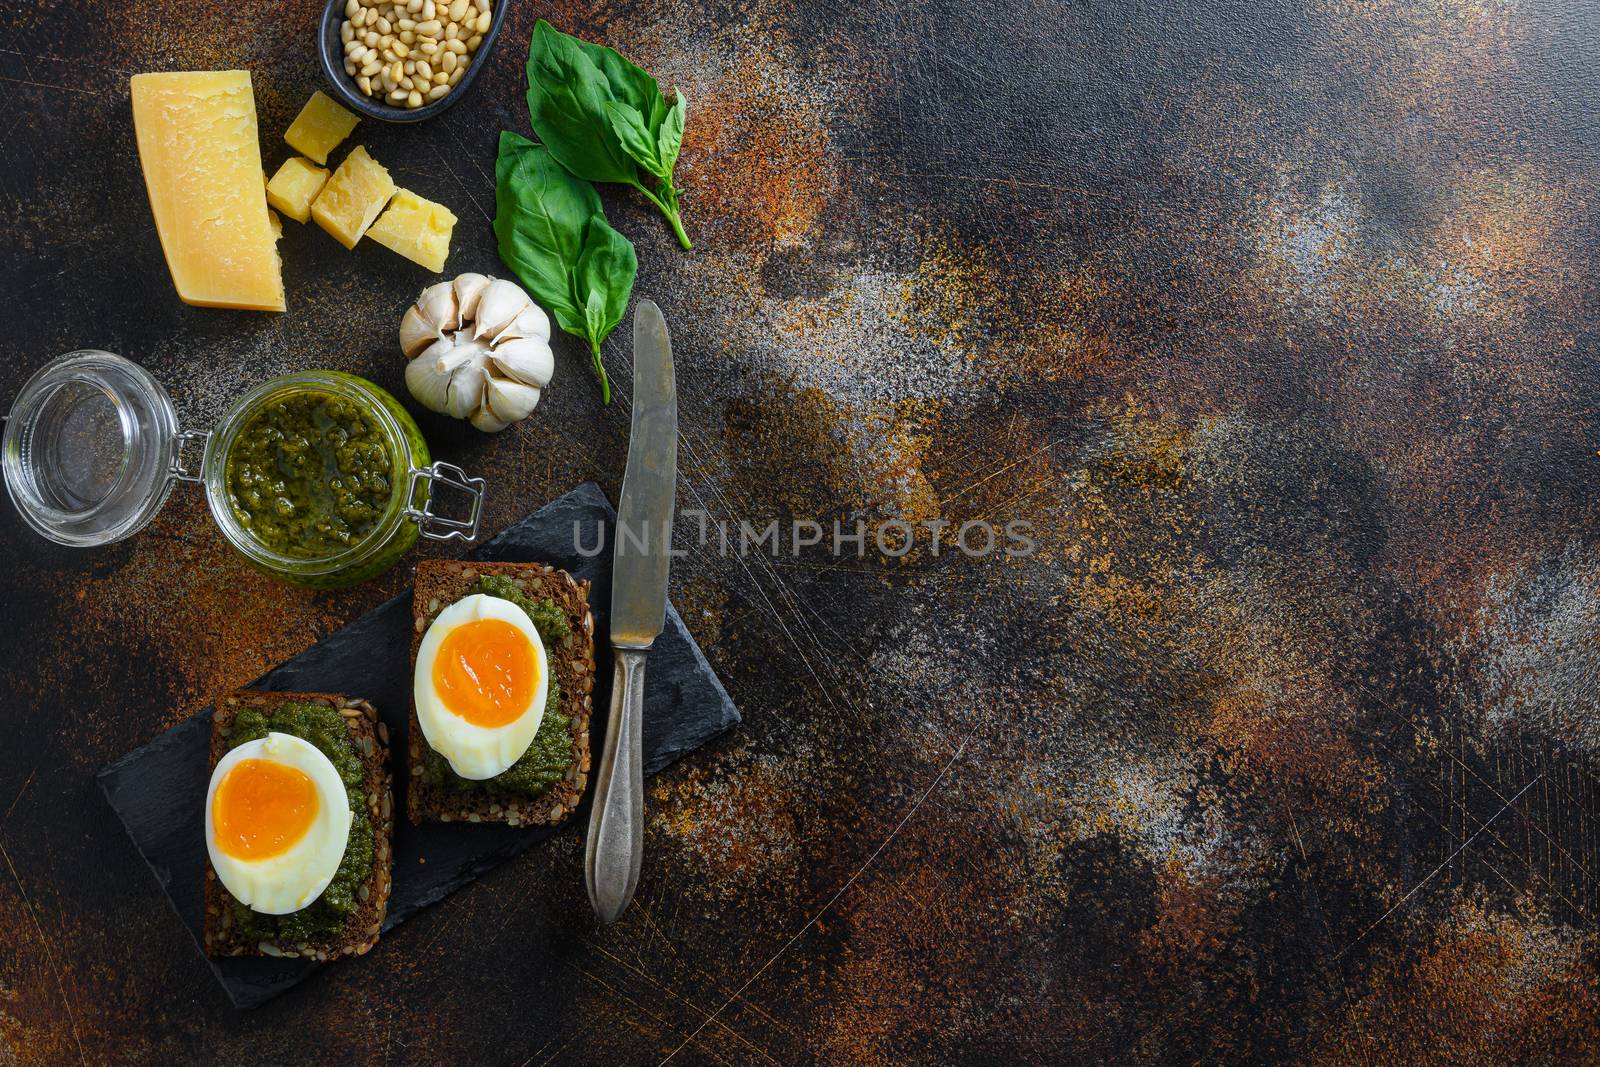 homemade eggs panini bread with Green basil pesto in glass jar silver spoon on italian breakfast with ingredients green pesto on gmetal surface table top view space for text.